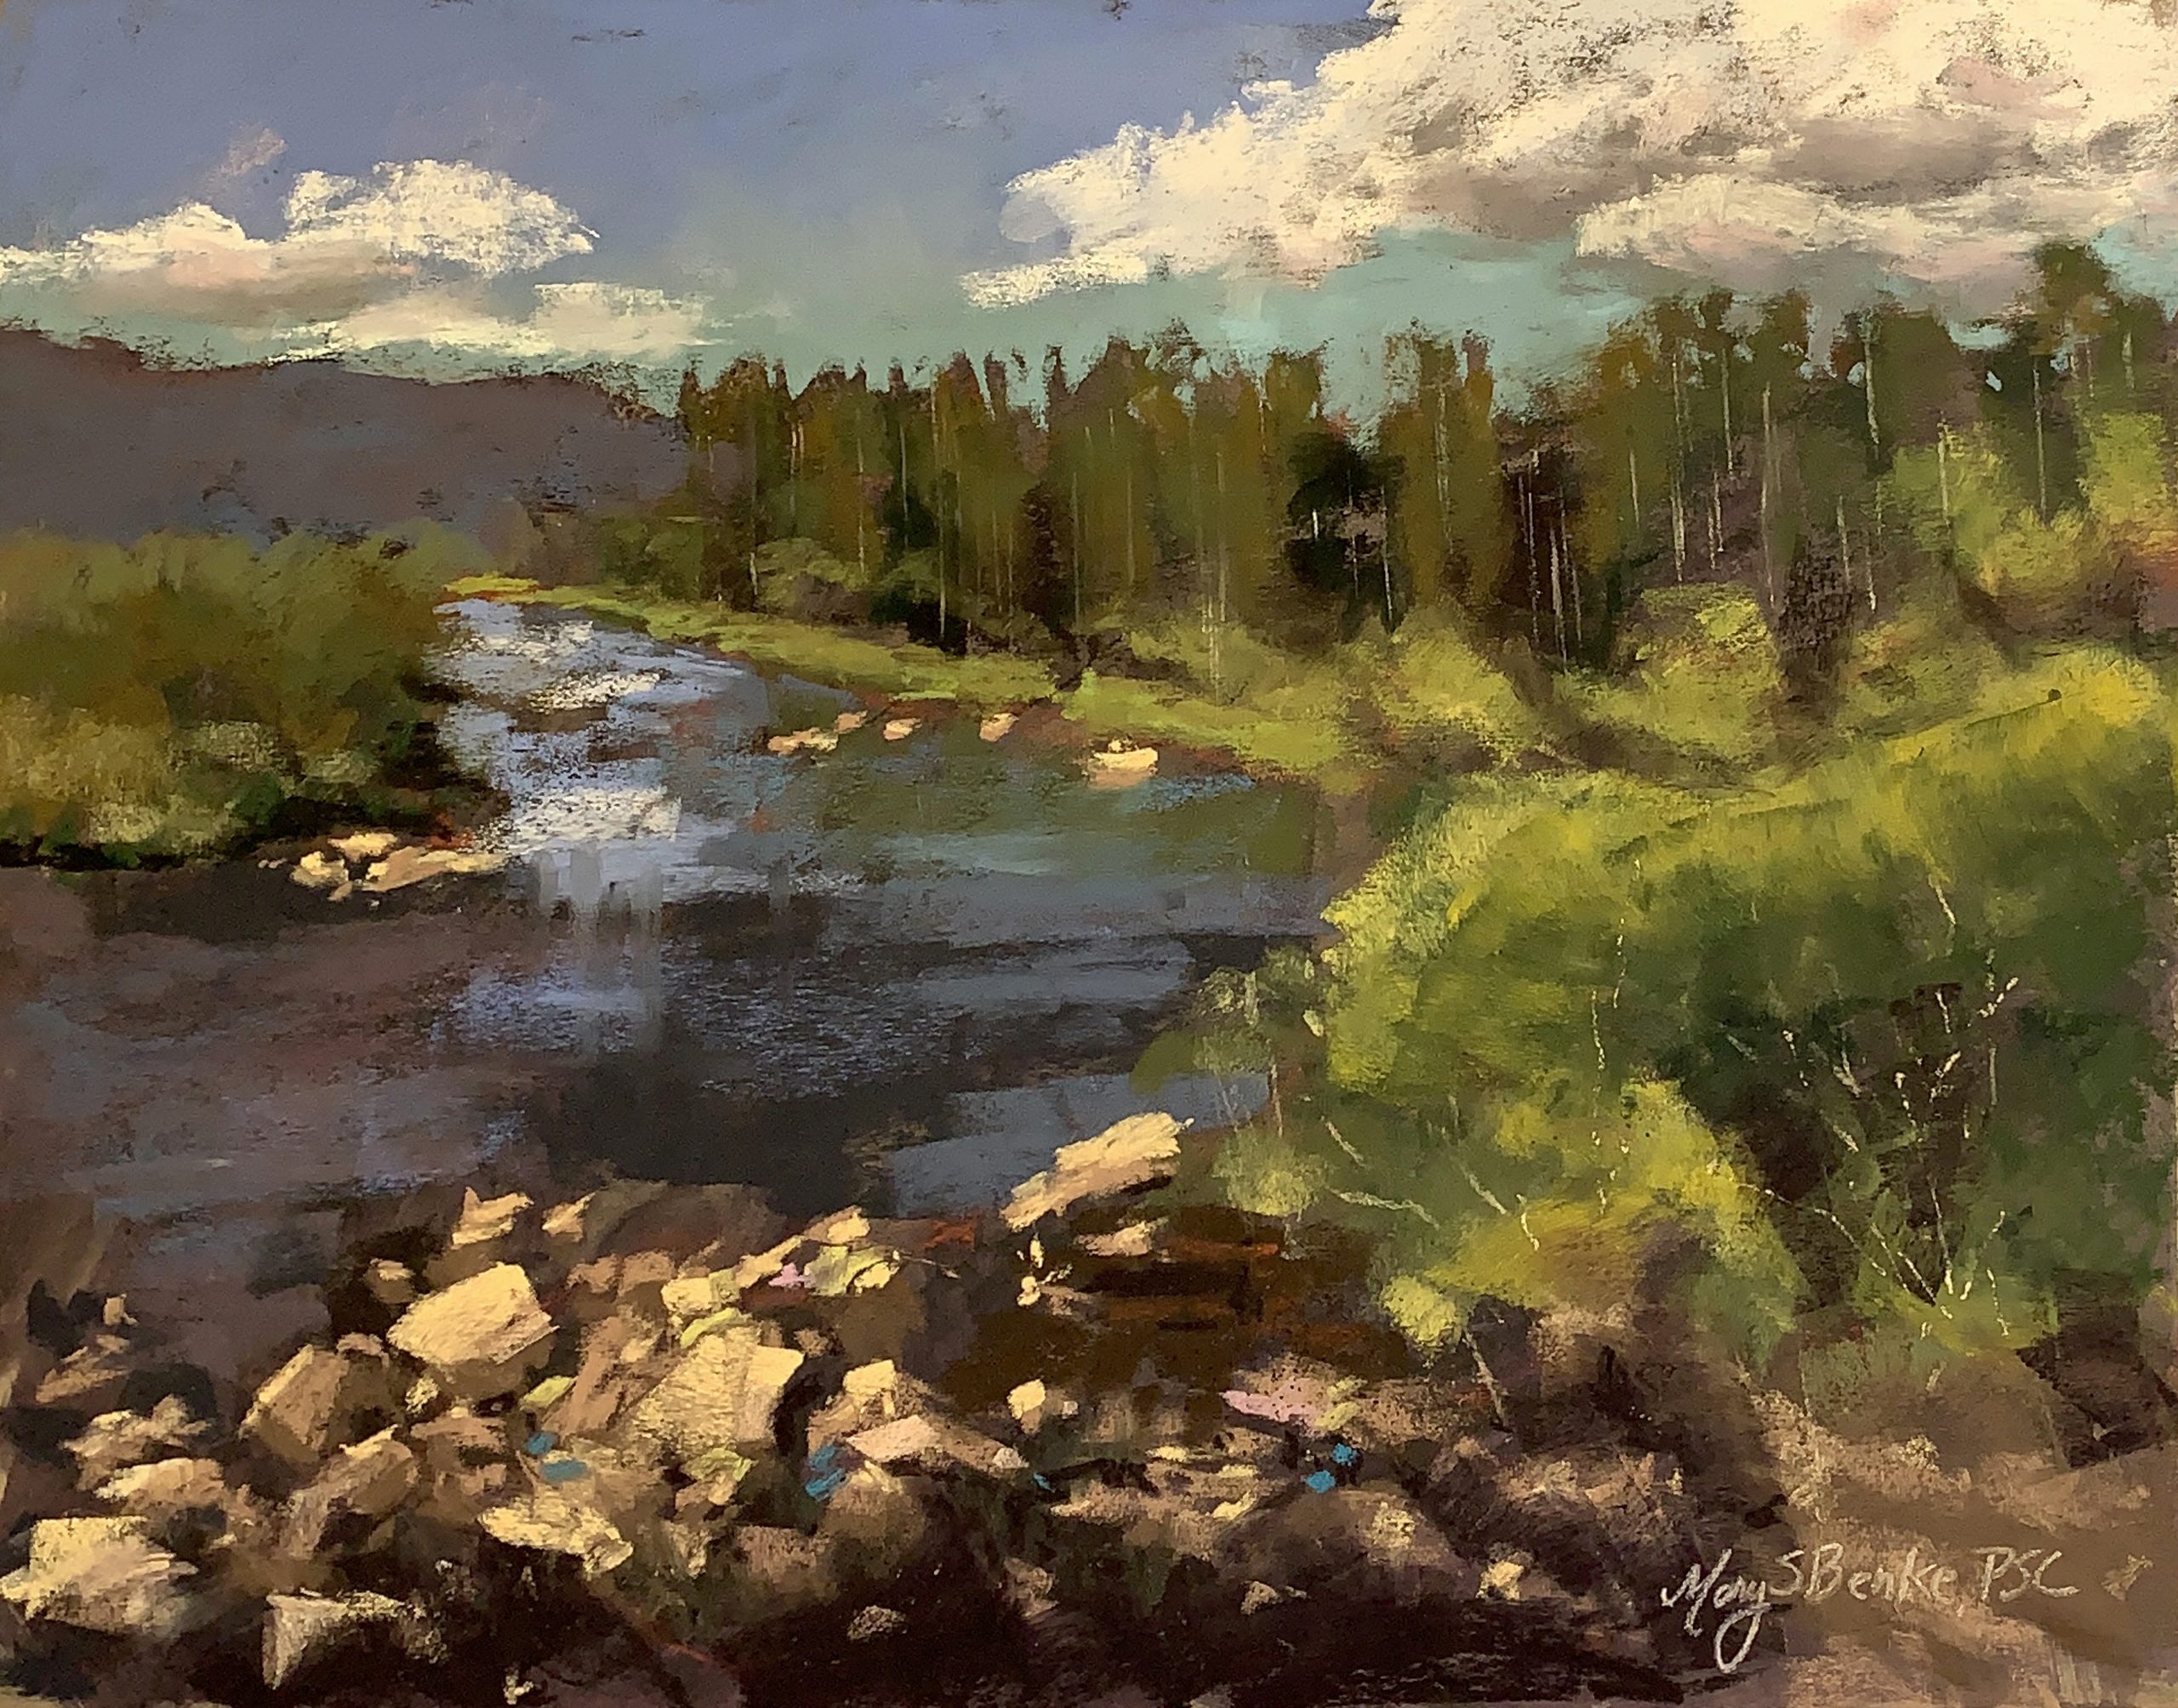 This pastel painting of a river leading toward Shadow Mountain near Grand Lake features a typical spectacular Colorado scene: colorful rocks, lush foliage, distant aspen trees, blue water, a purple mountain and dramatic sky by Mary Benke